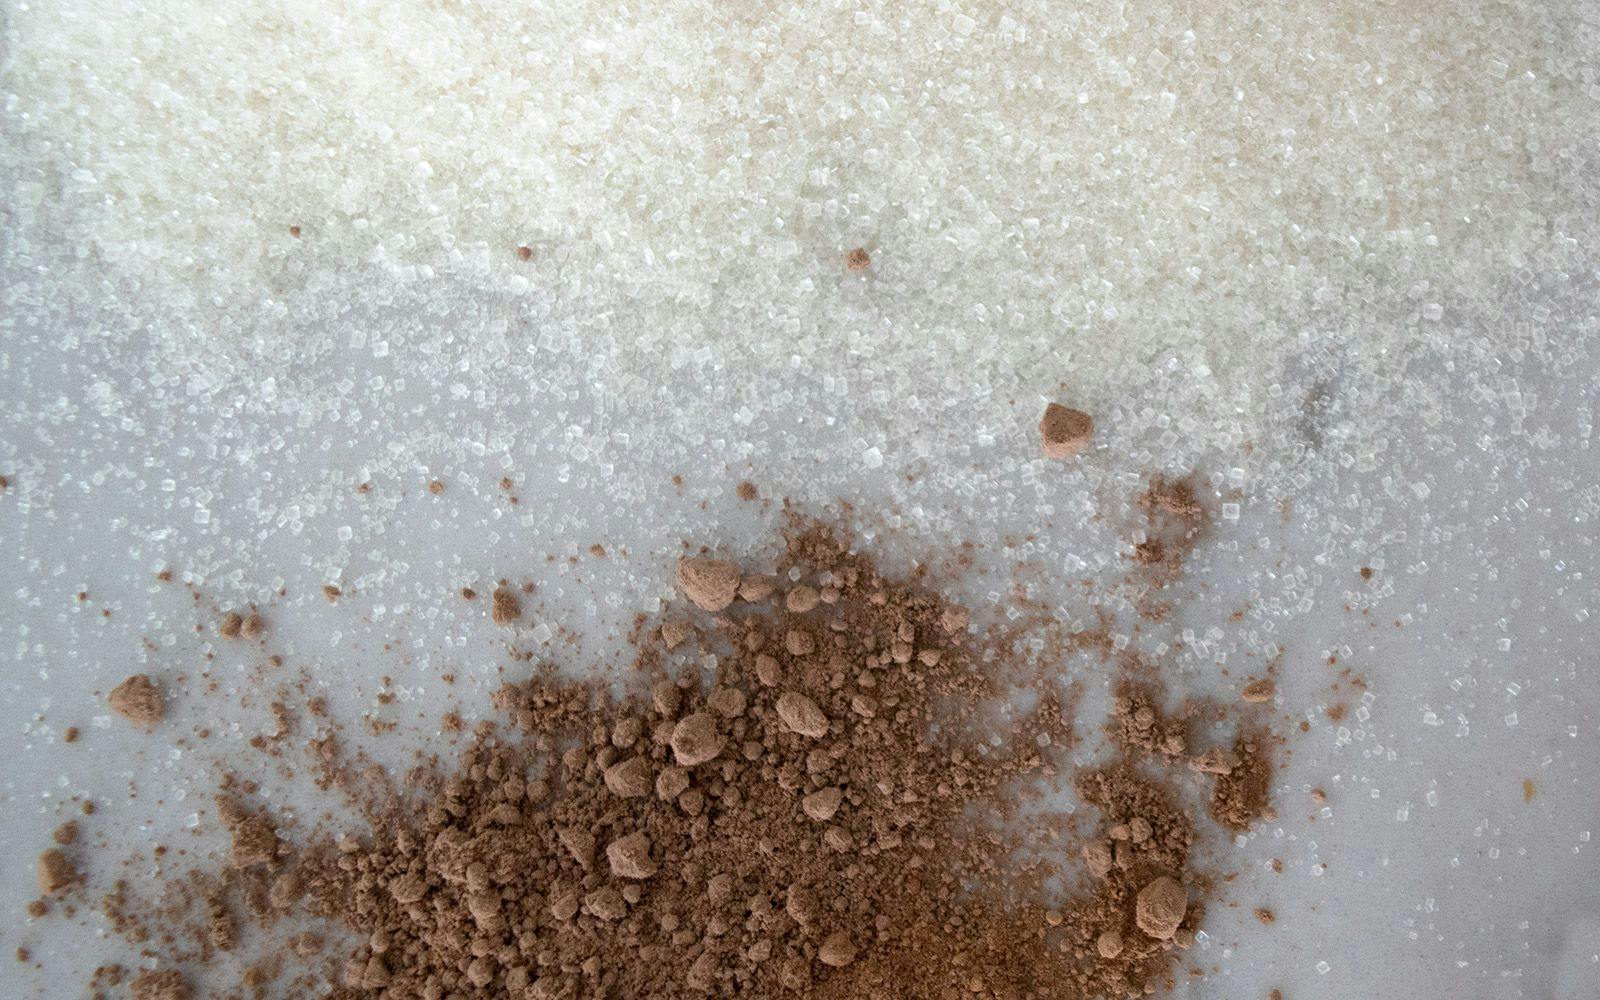 Fair trade cane sugar and cocoa powder sprinkled on a countertop.